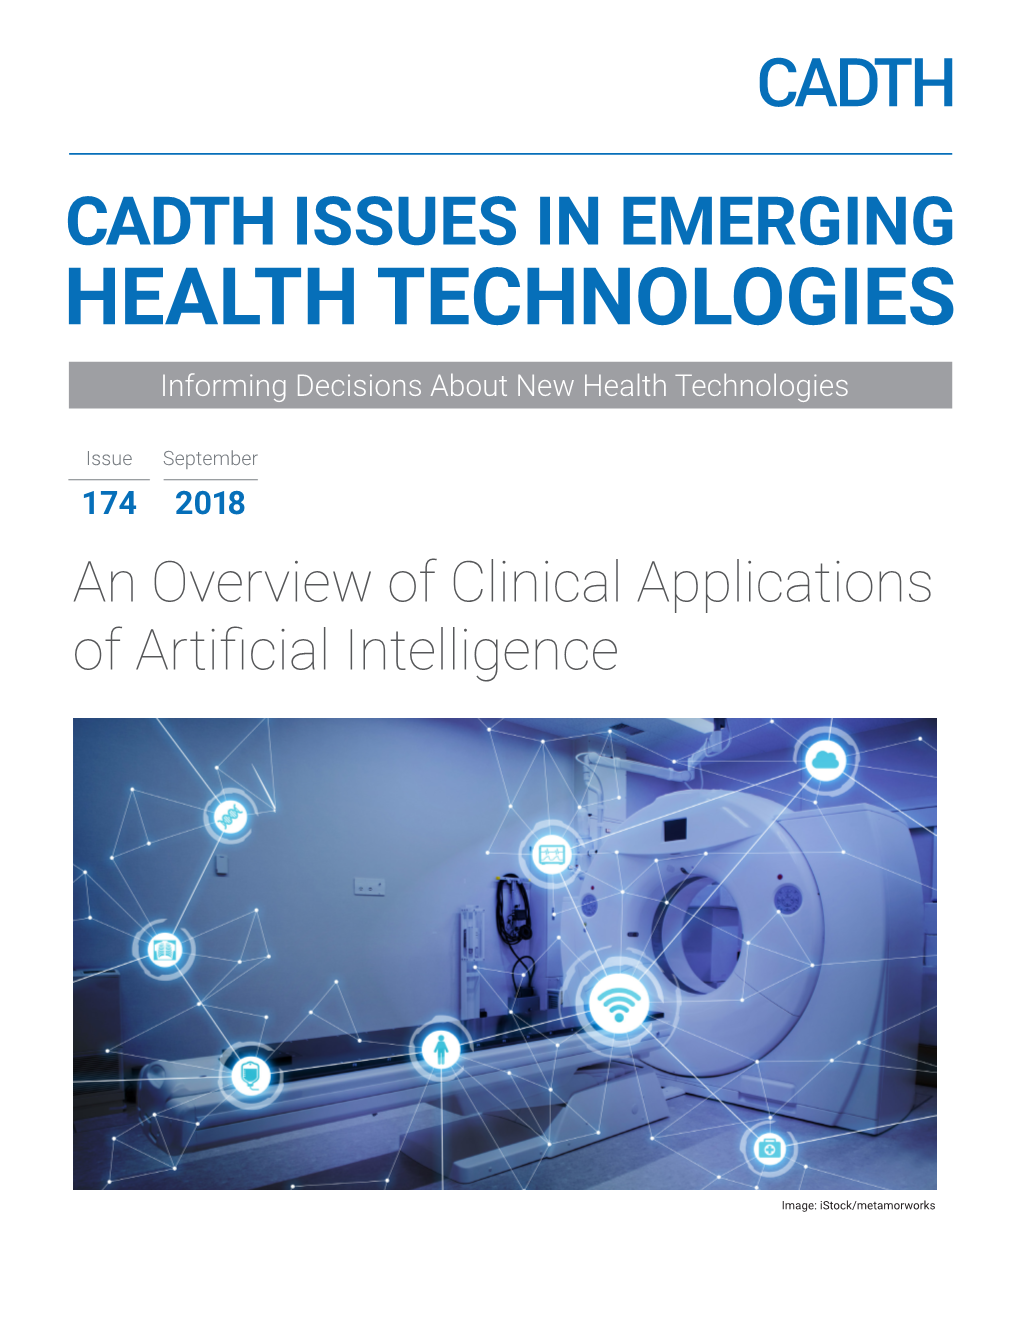 An Overview of Clinical Applications of Artificial Intelligence